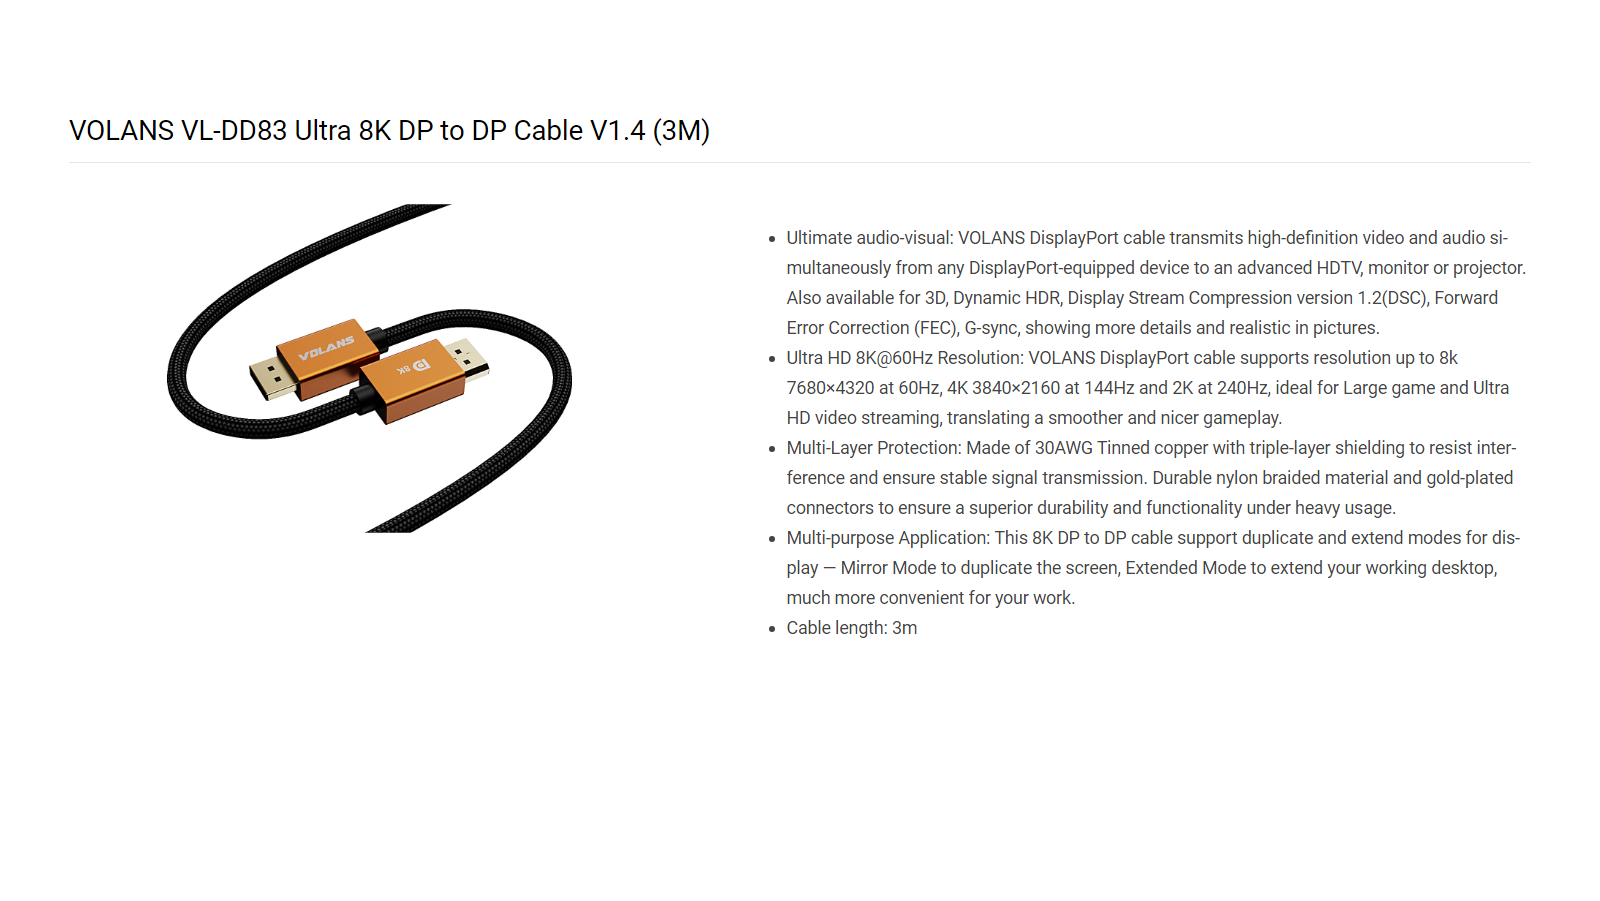 A large marketing image providing additional information about the product Volans Ultra 8K DP to DP Cable V1.4 - 3m - Additional alt info not provided